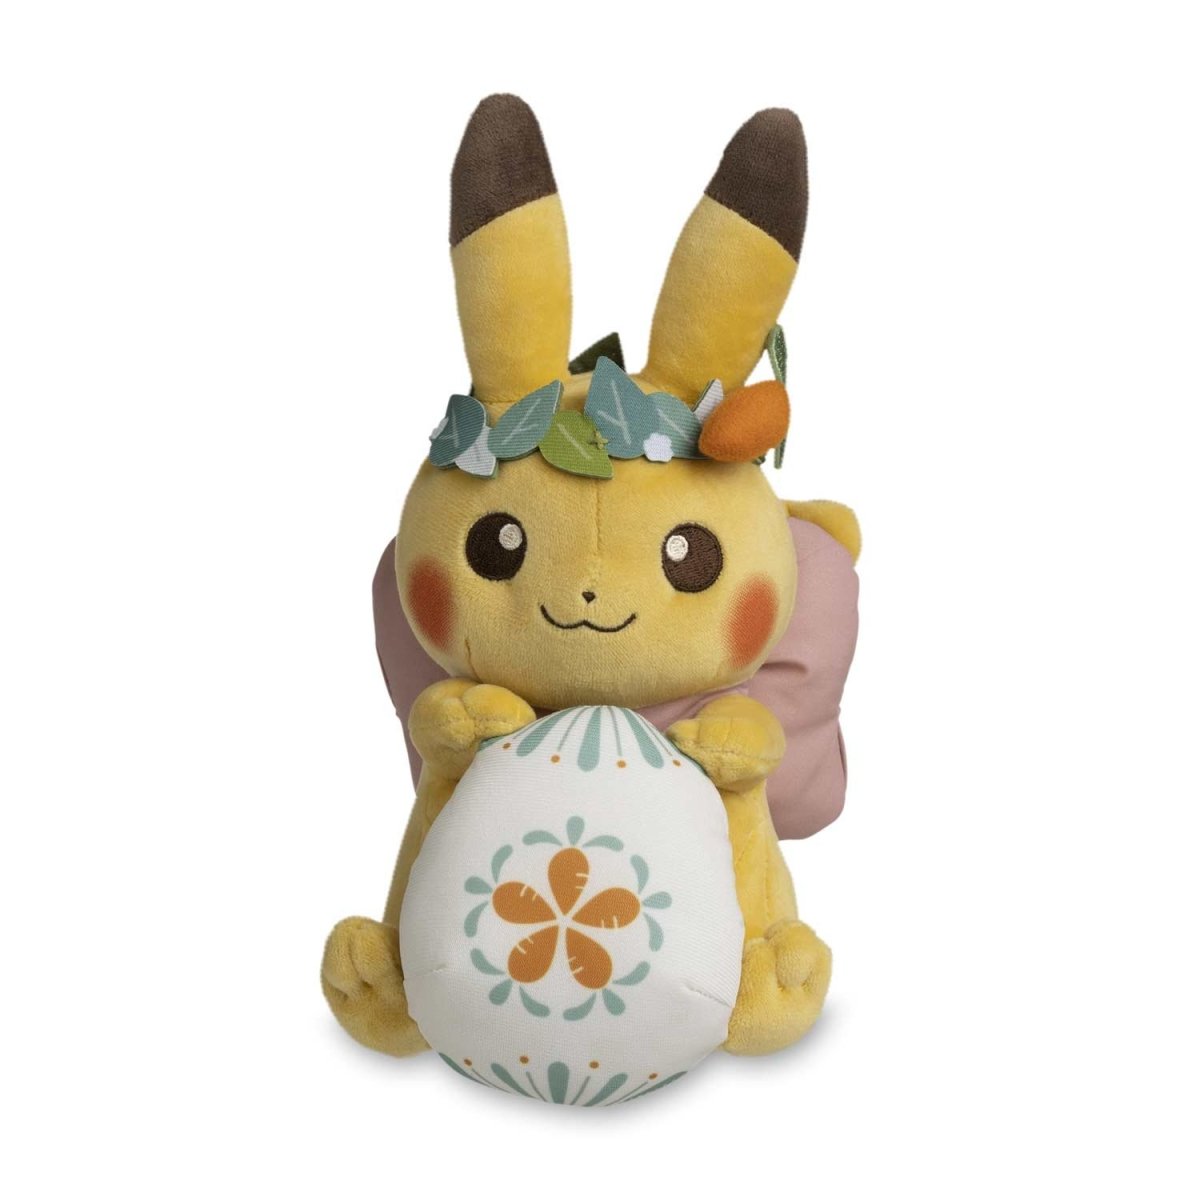 Cuddly Eevee Plush - 8 ½ In.  Pokémon Center Official Site